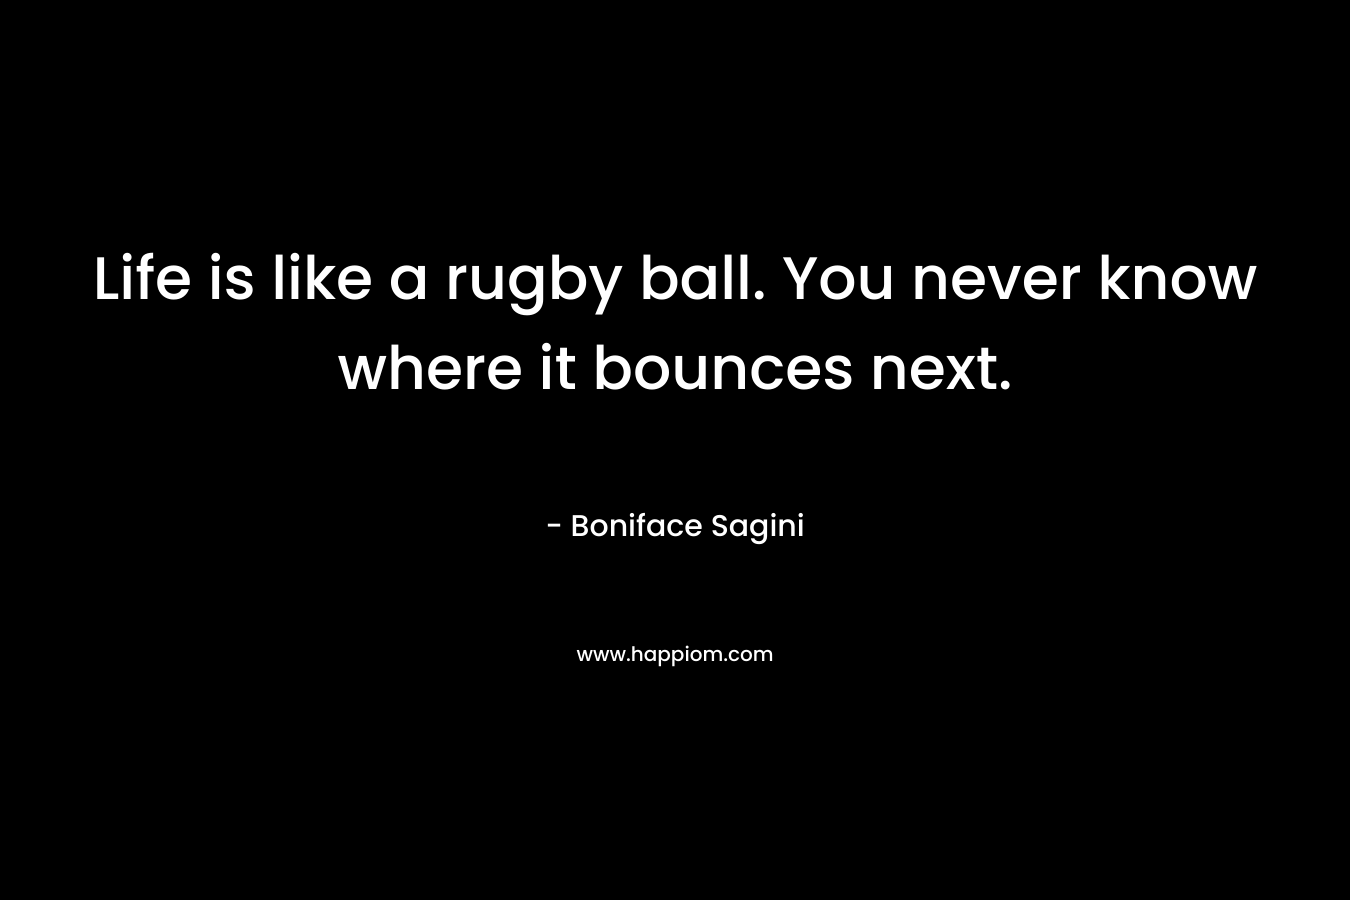 Life is like a rugby ball. You never know where it bounces next. – Boniface Sagini